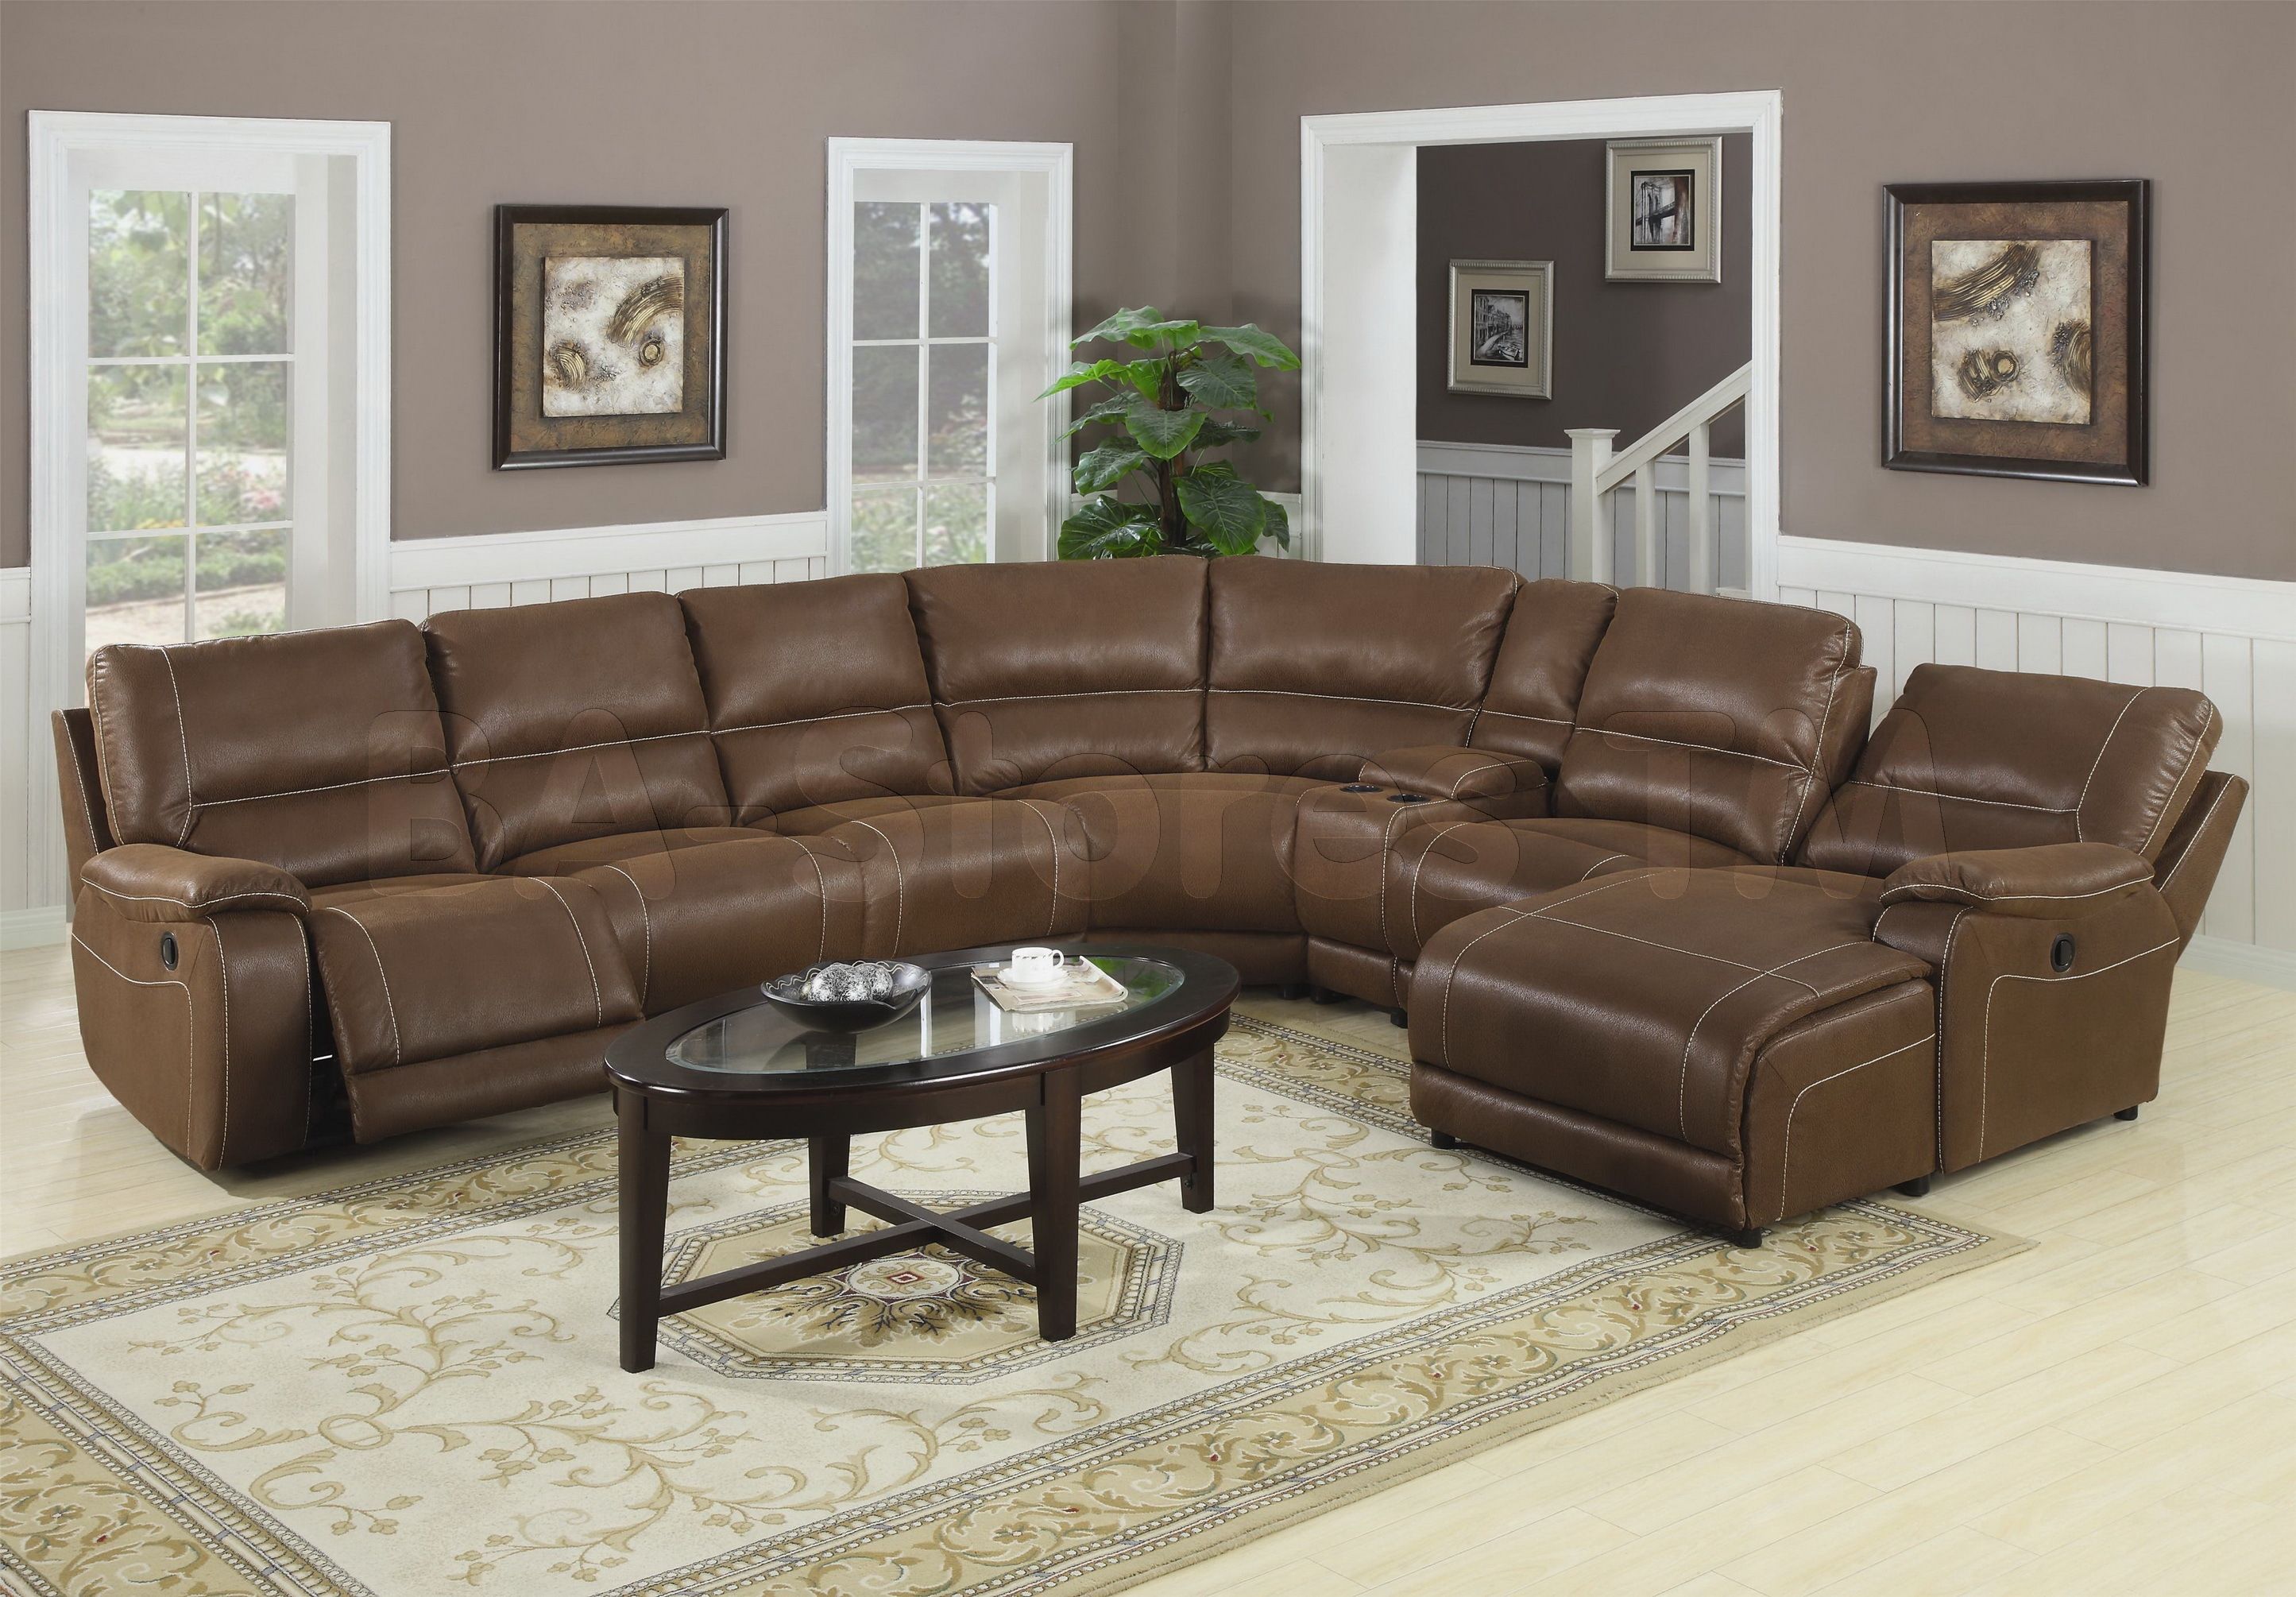 Cool Huge Sectional Sofas 69 On Bentley Sectional Leather Sofa Intended For Bentley Sectional Leather Sofa (View 4 of 12)